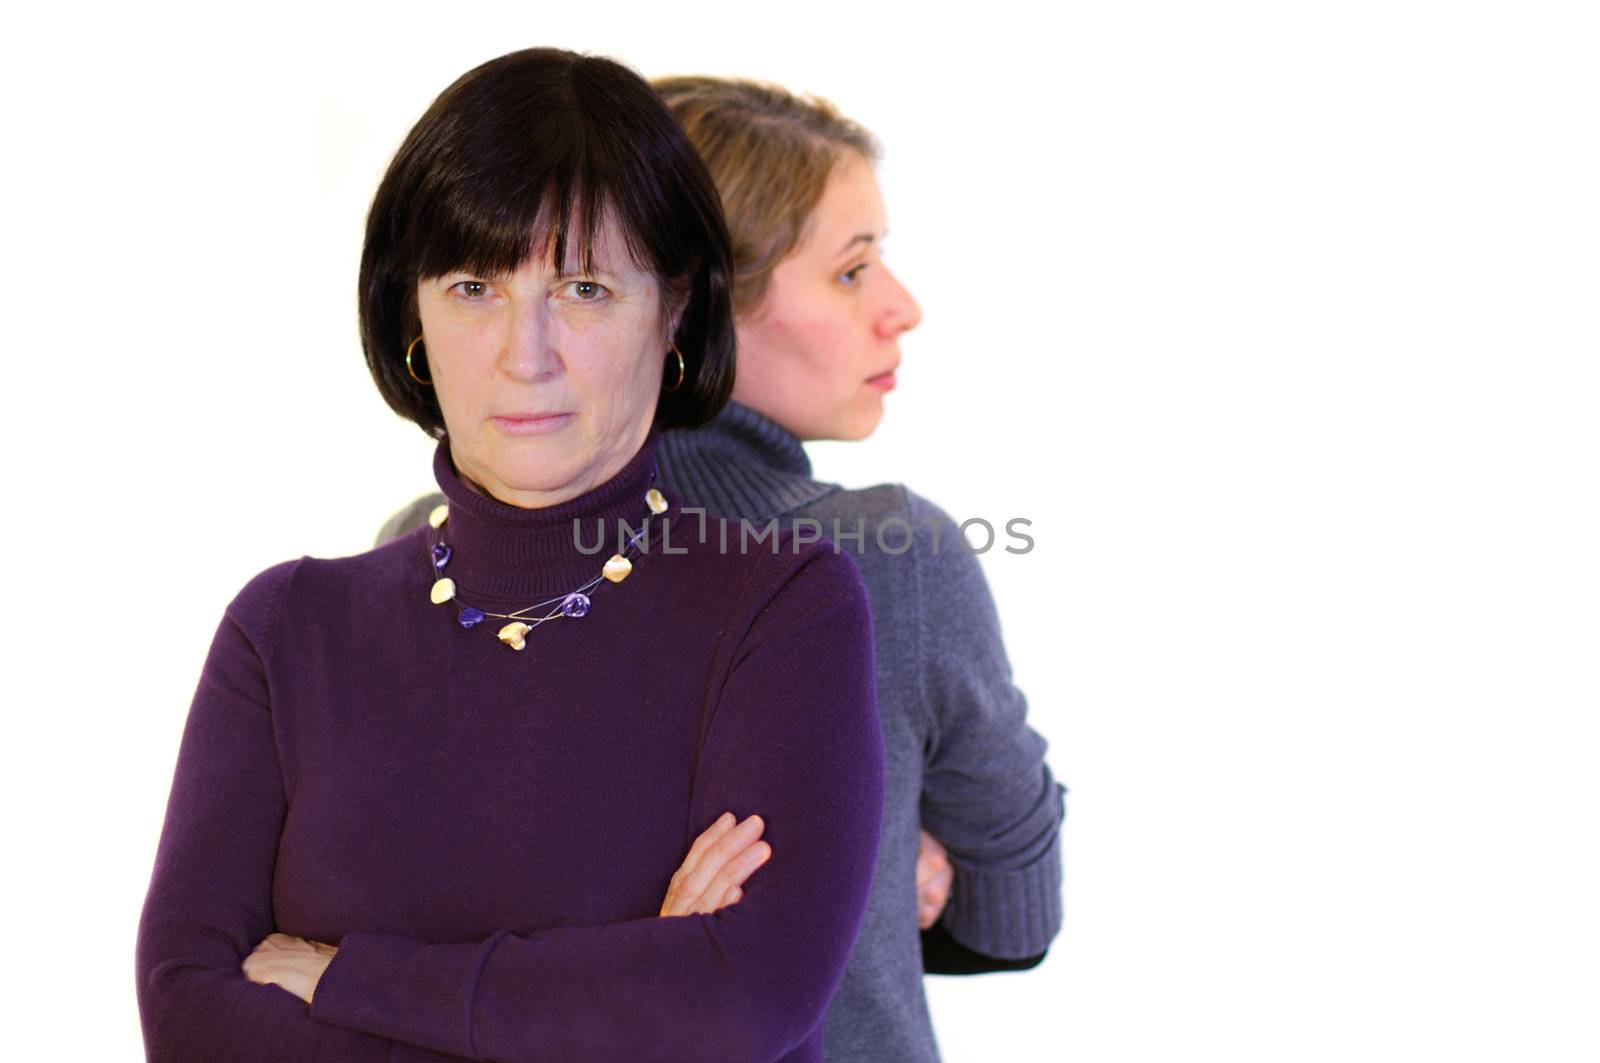 Mother and doughter standing back to back after conflict. Isolated over white background.